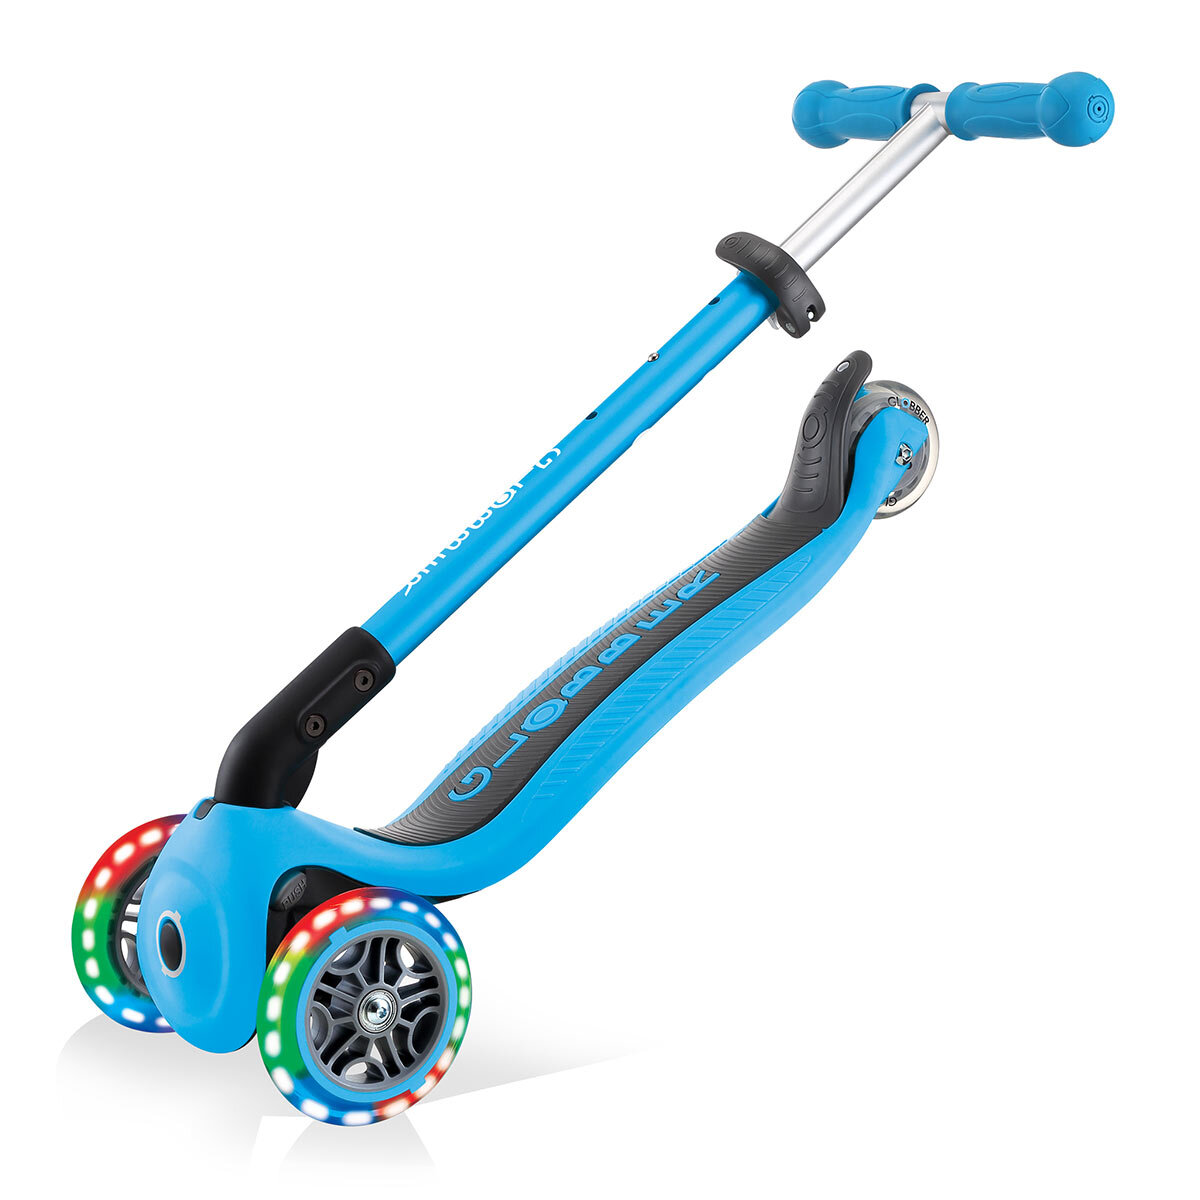 Buy Globber Primo Lights Scooter in Sky Blue 4 Image at Costco.co.uk